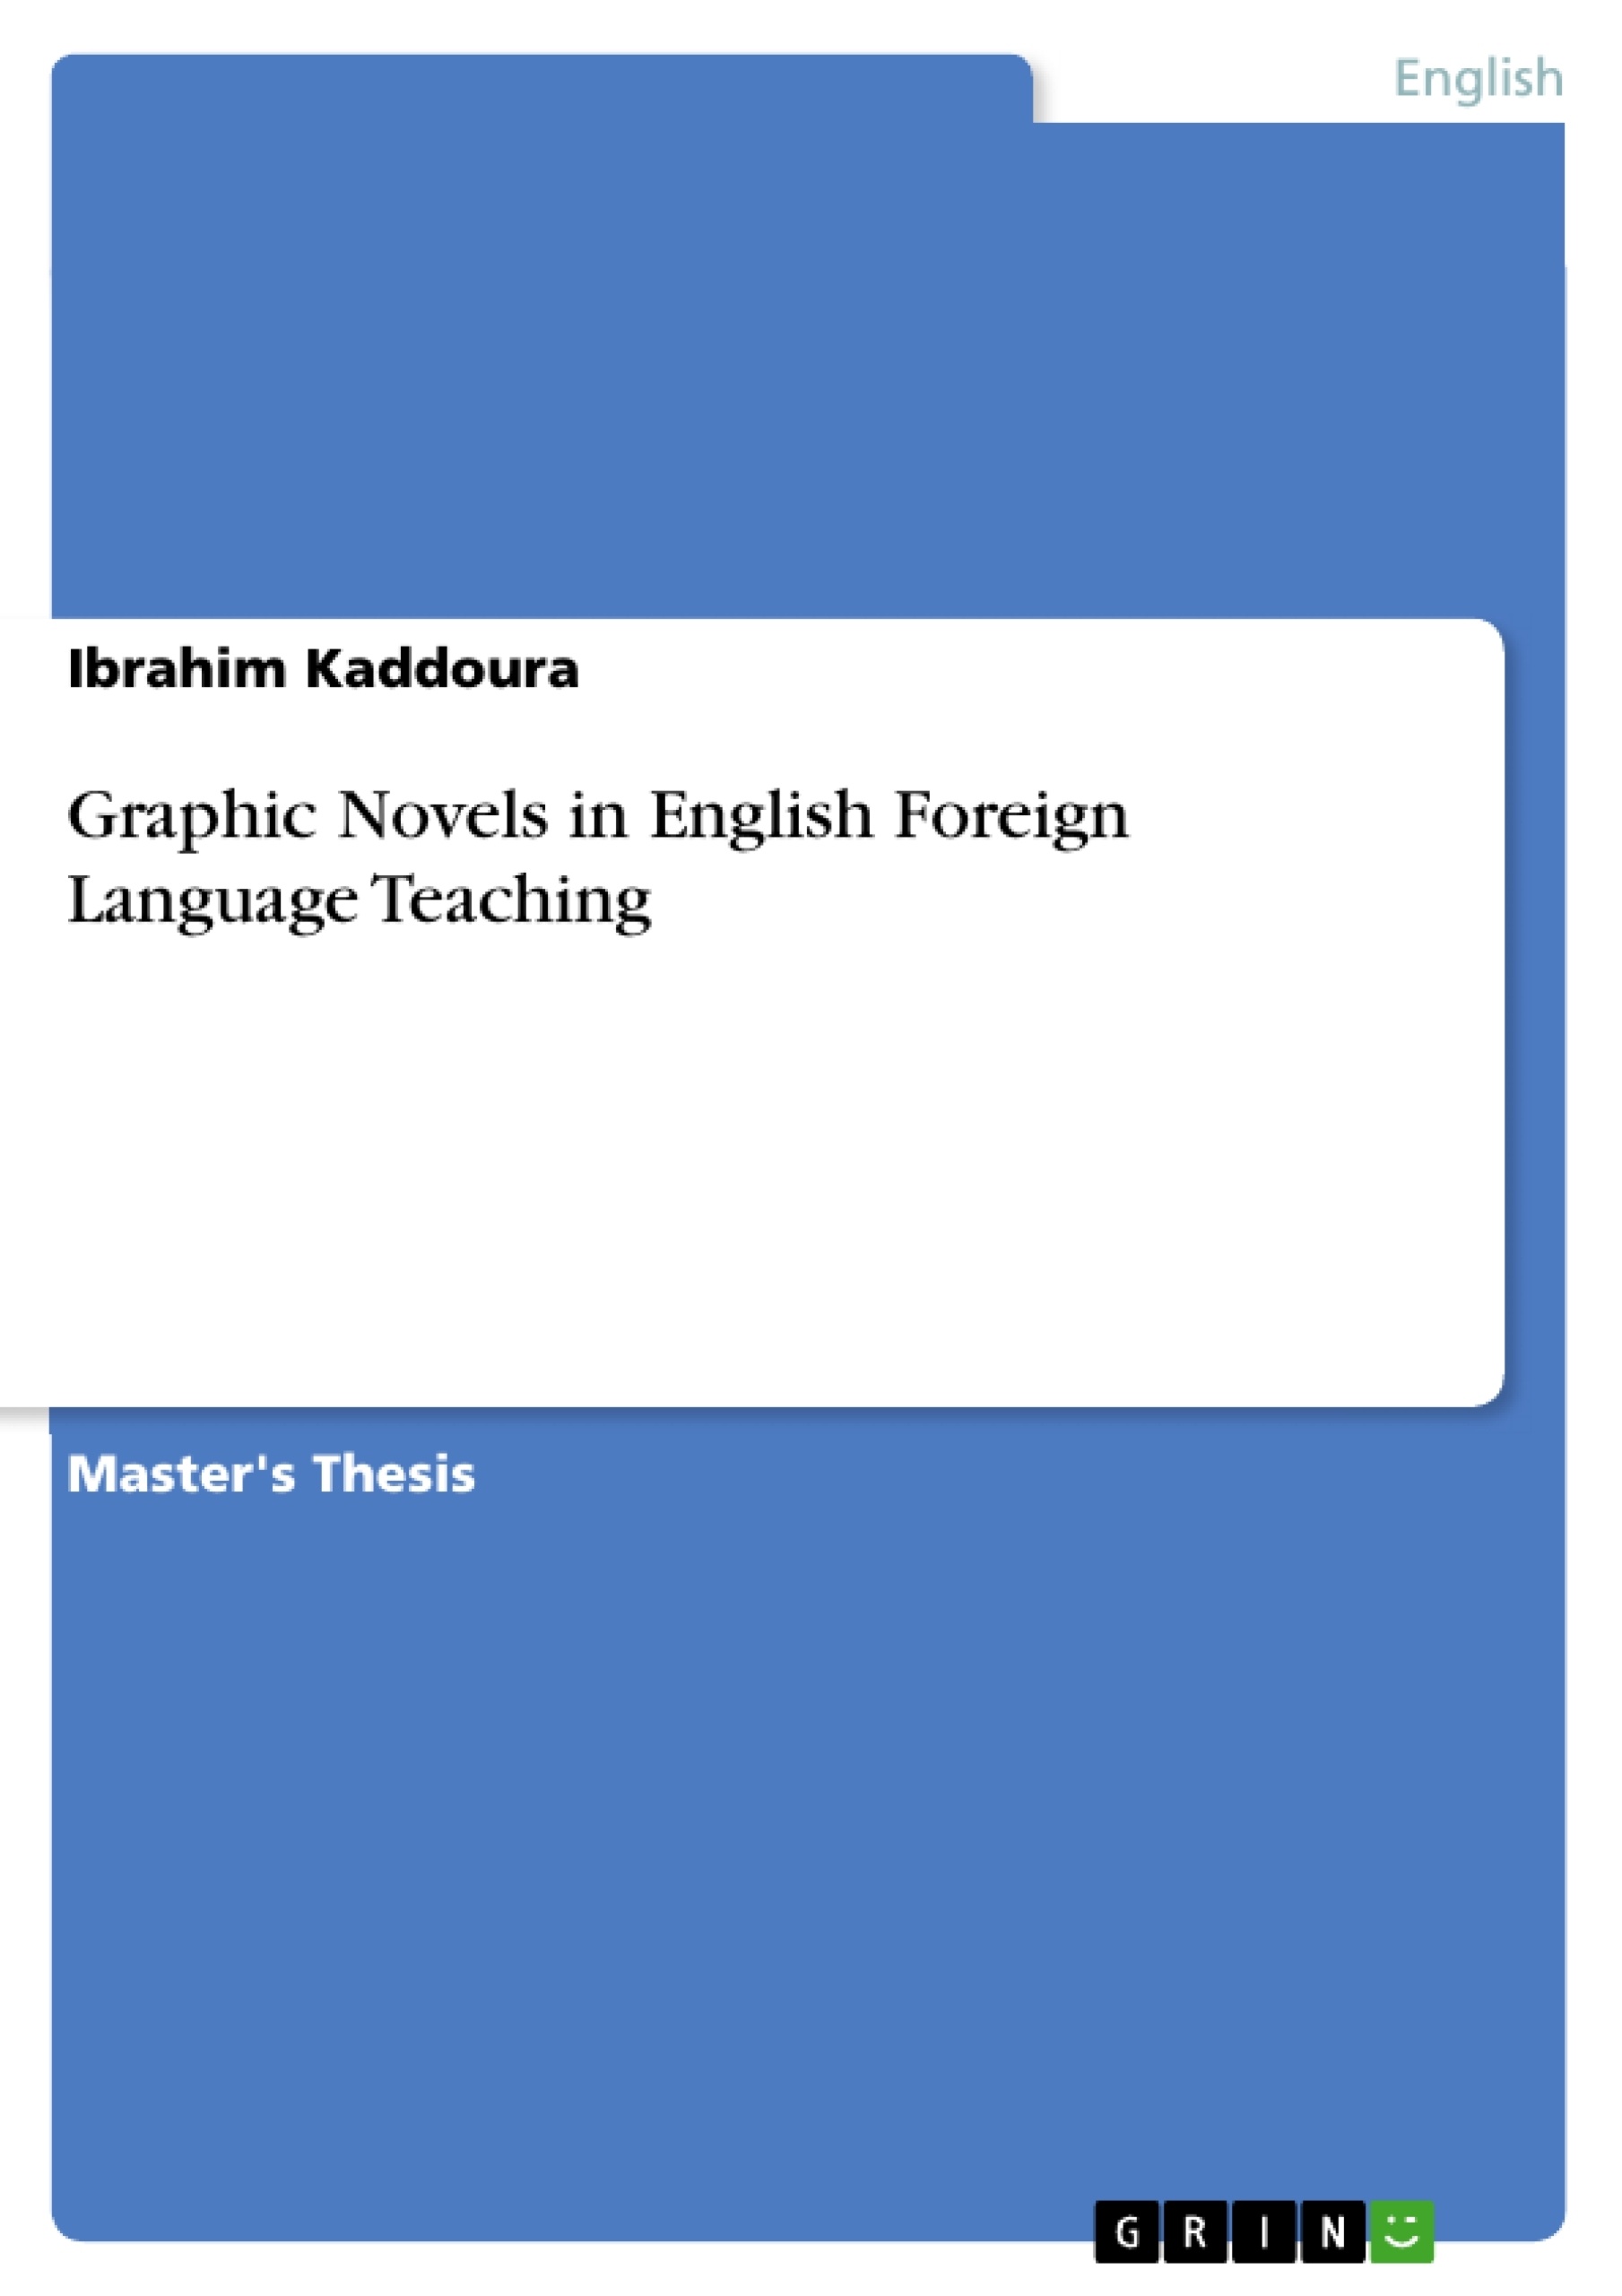 Title: Graphic Novels in English Foreign Language Teaching